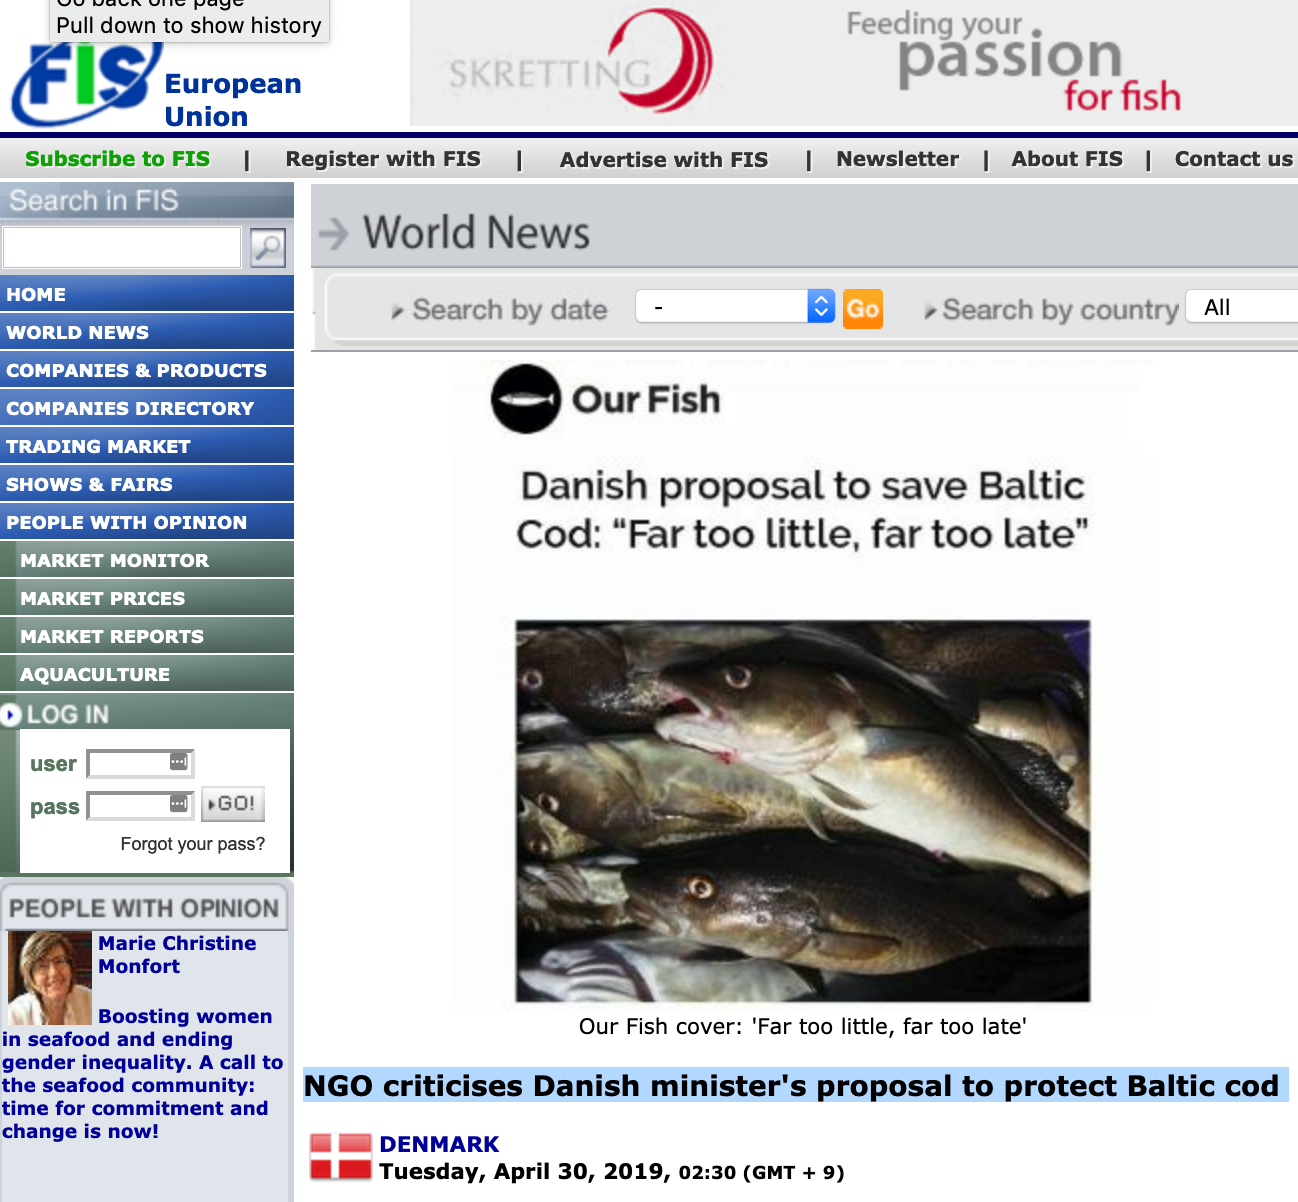 NGO criticises Danish minister's proposal to protect Baltic cod